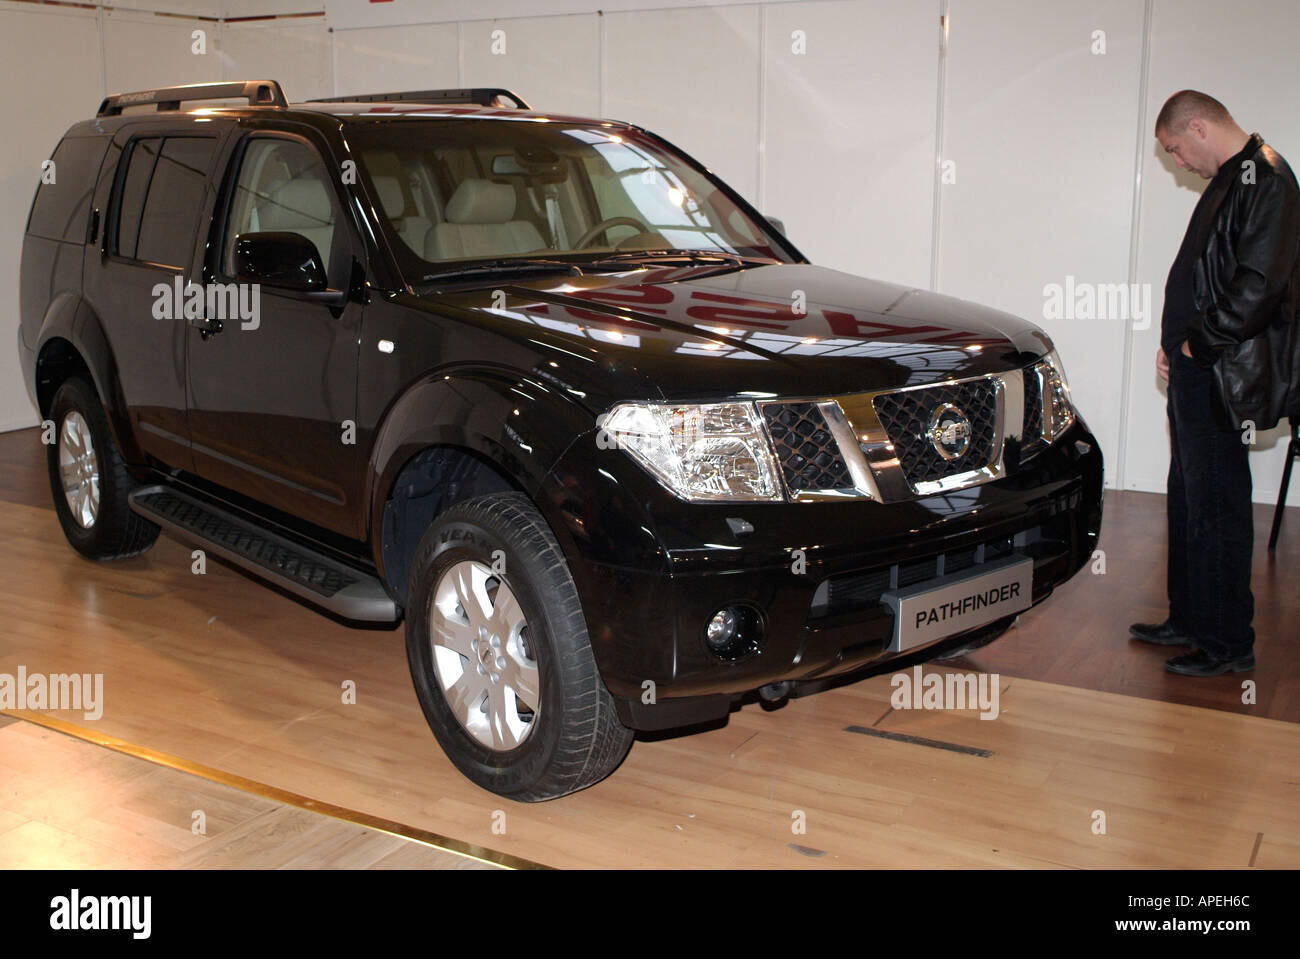 Nissan Pathfinder 4X4 in a Car Showroom Stock Photo